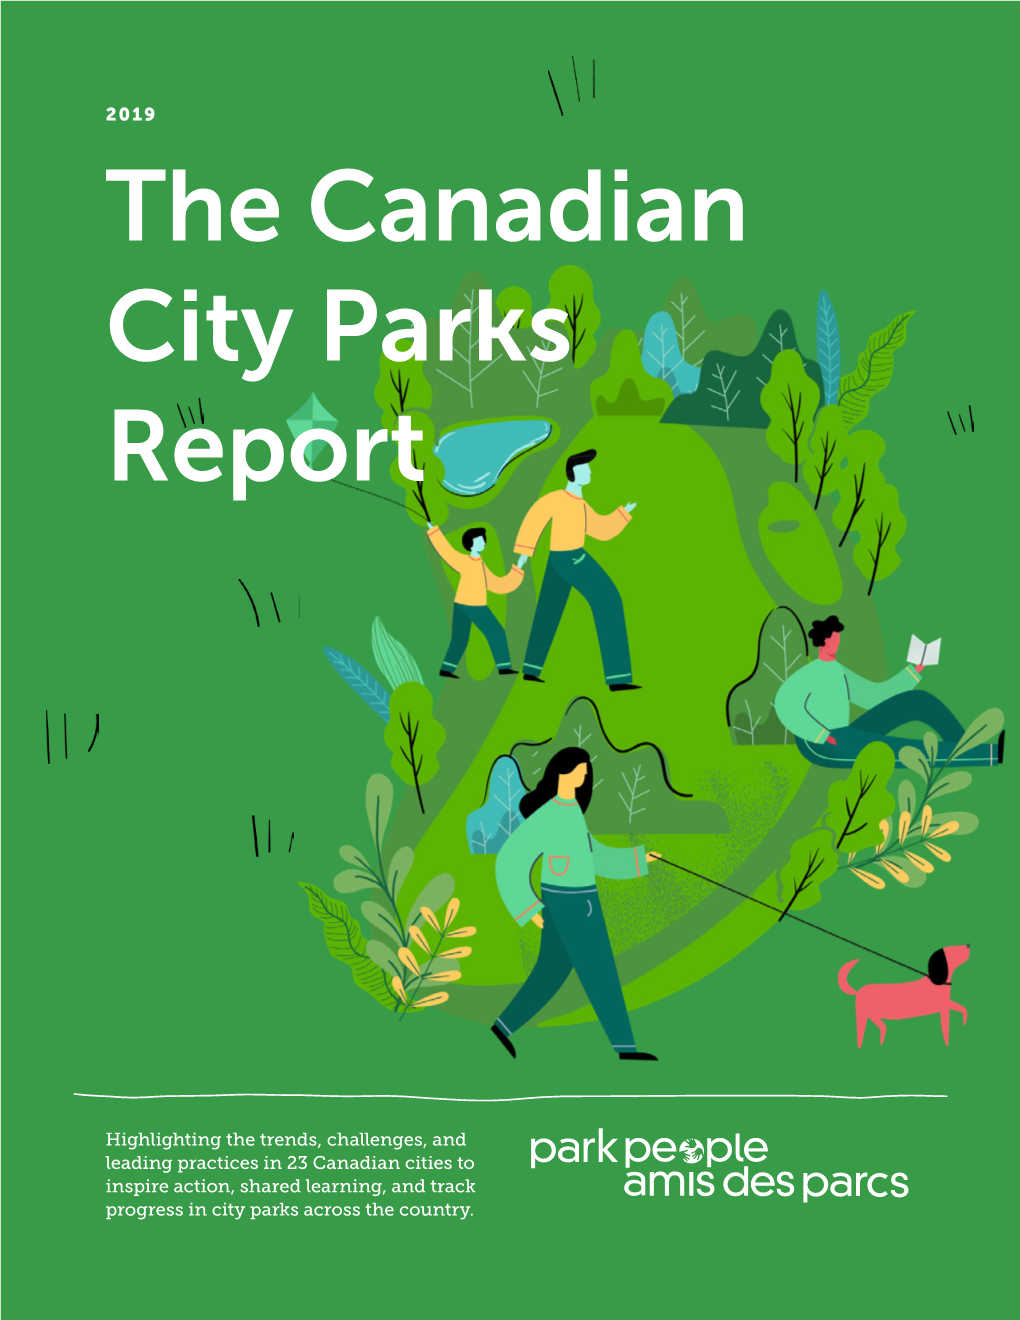 The Canadian City Parks Report